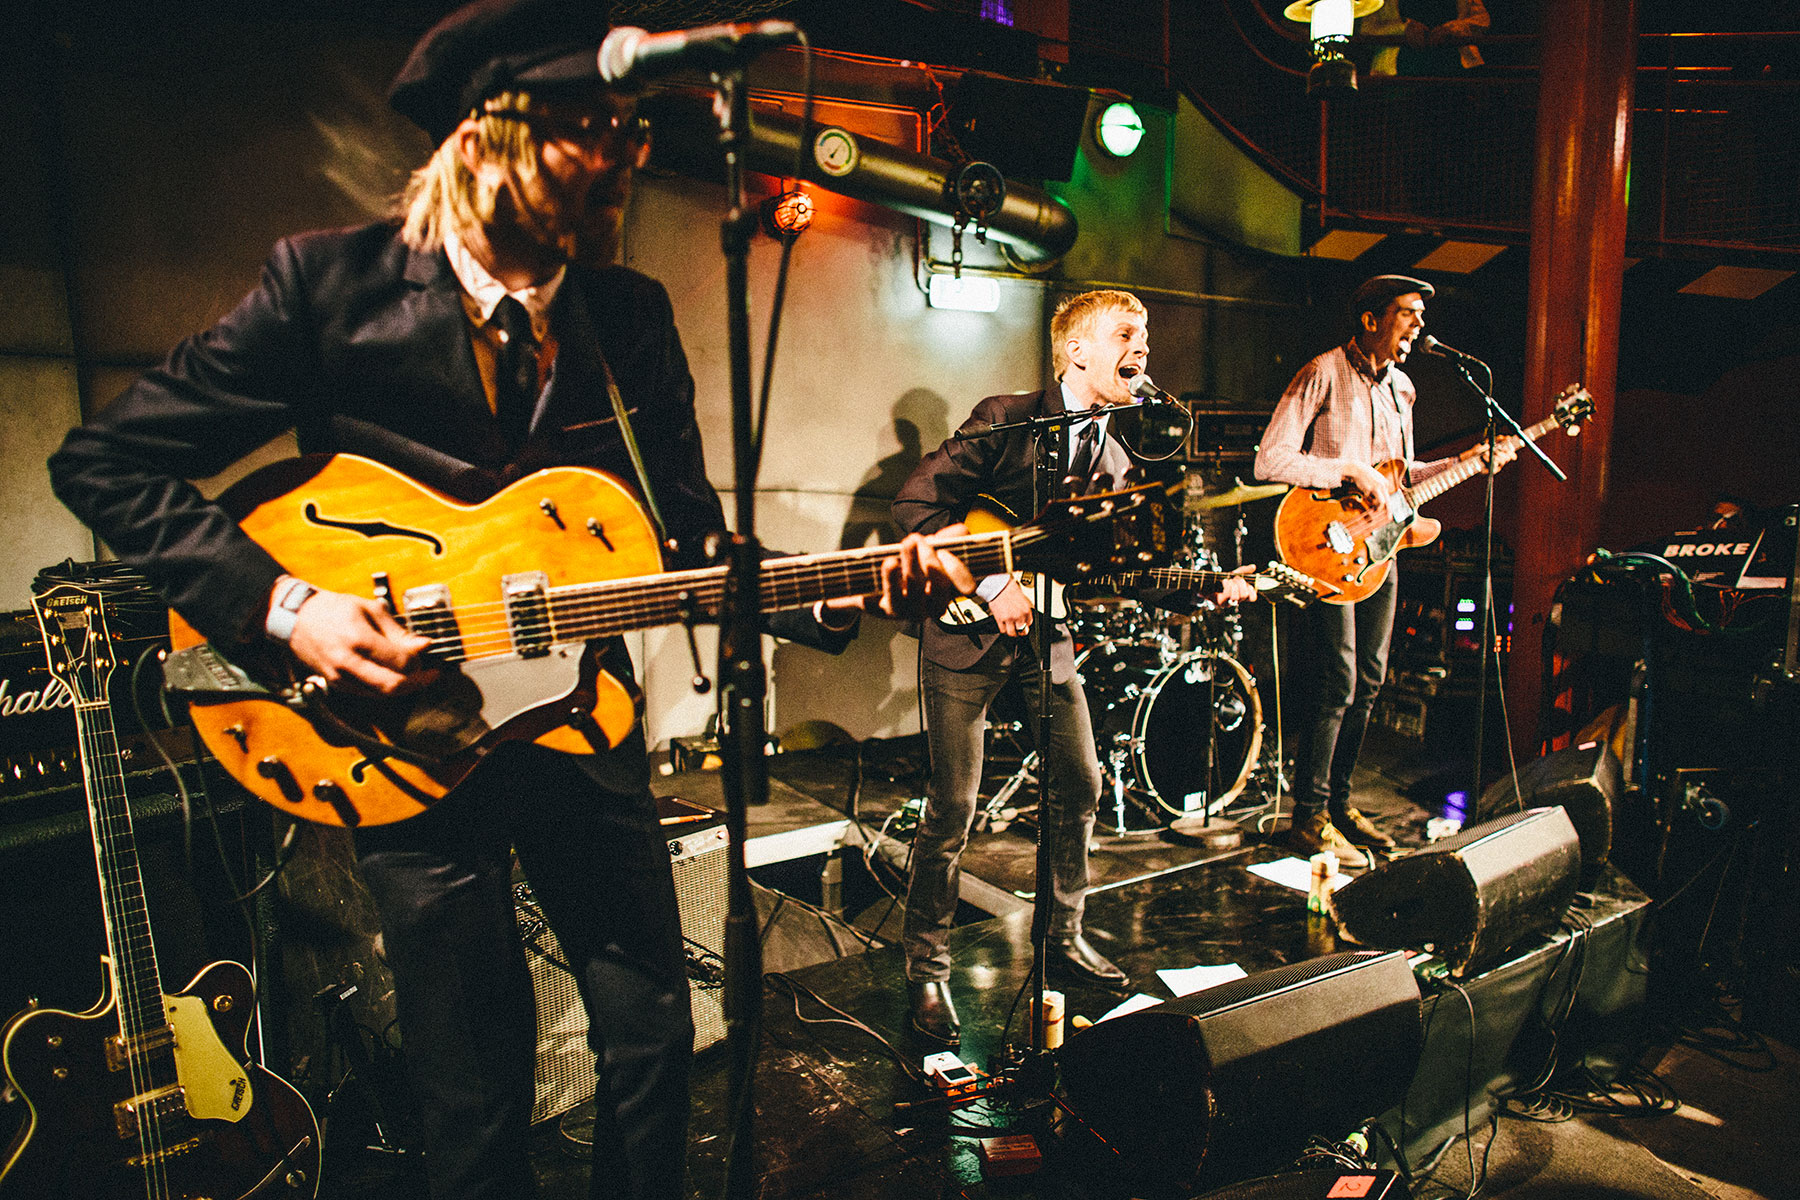 Photograph from Tivoli's Fredagsrock Festival 2013, here it's 60's Garagerockban The Youth performing in skærsilden